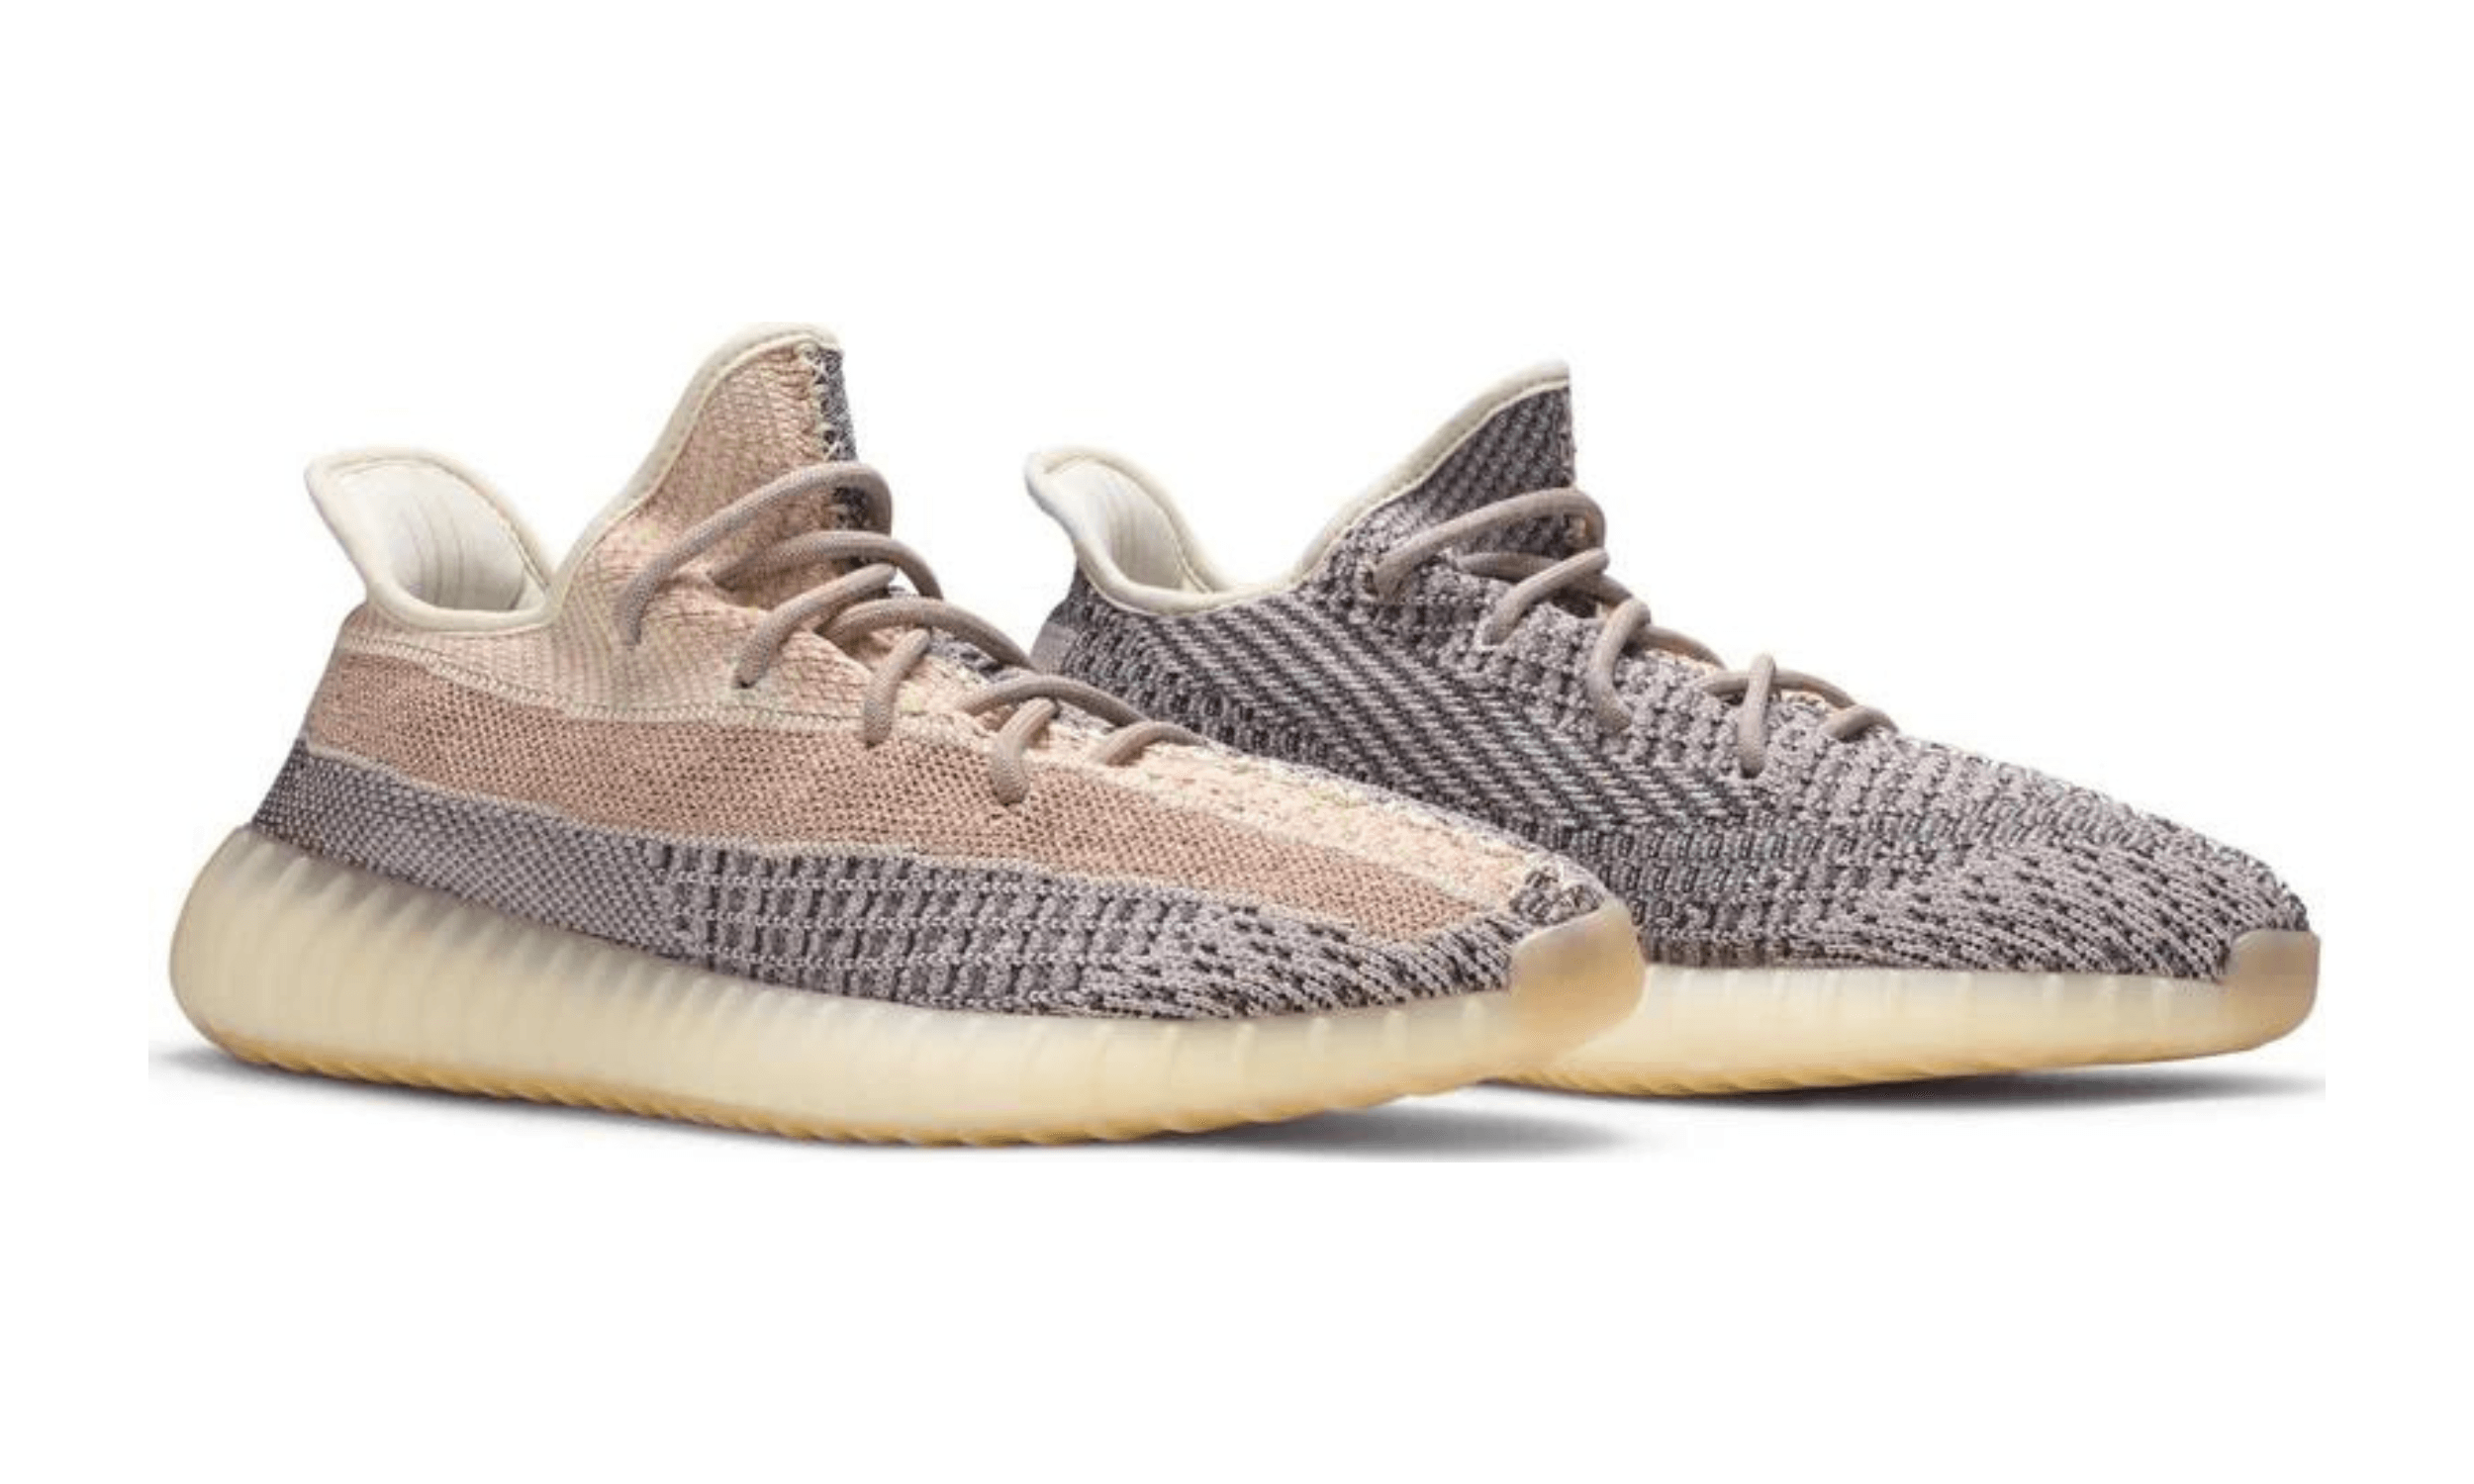 Yeezy Boost 350 V2 Ash Pearl - Kicksite-GY7658